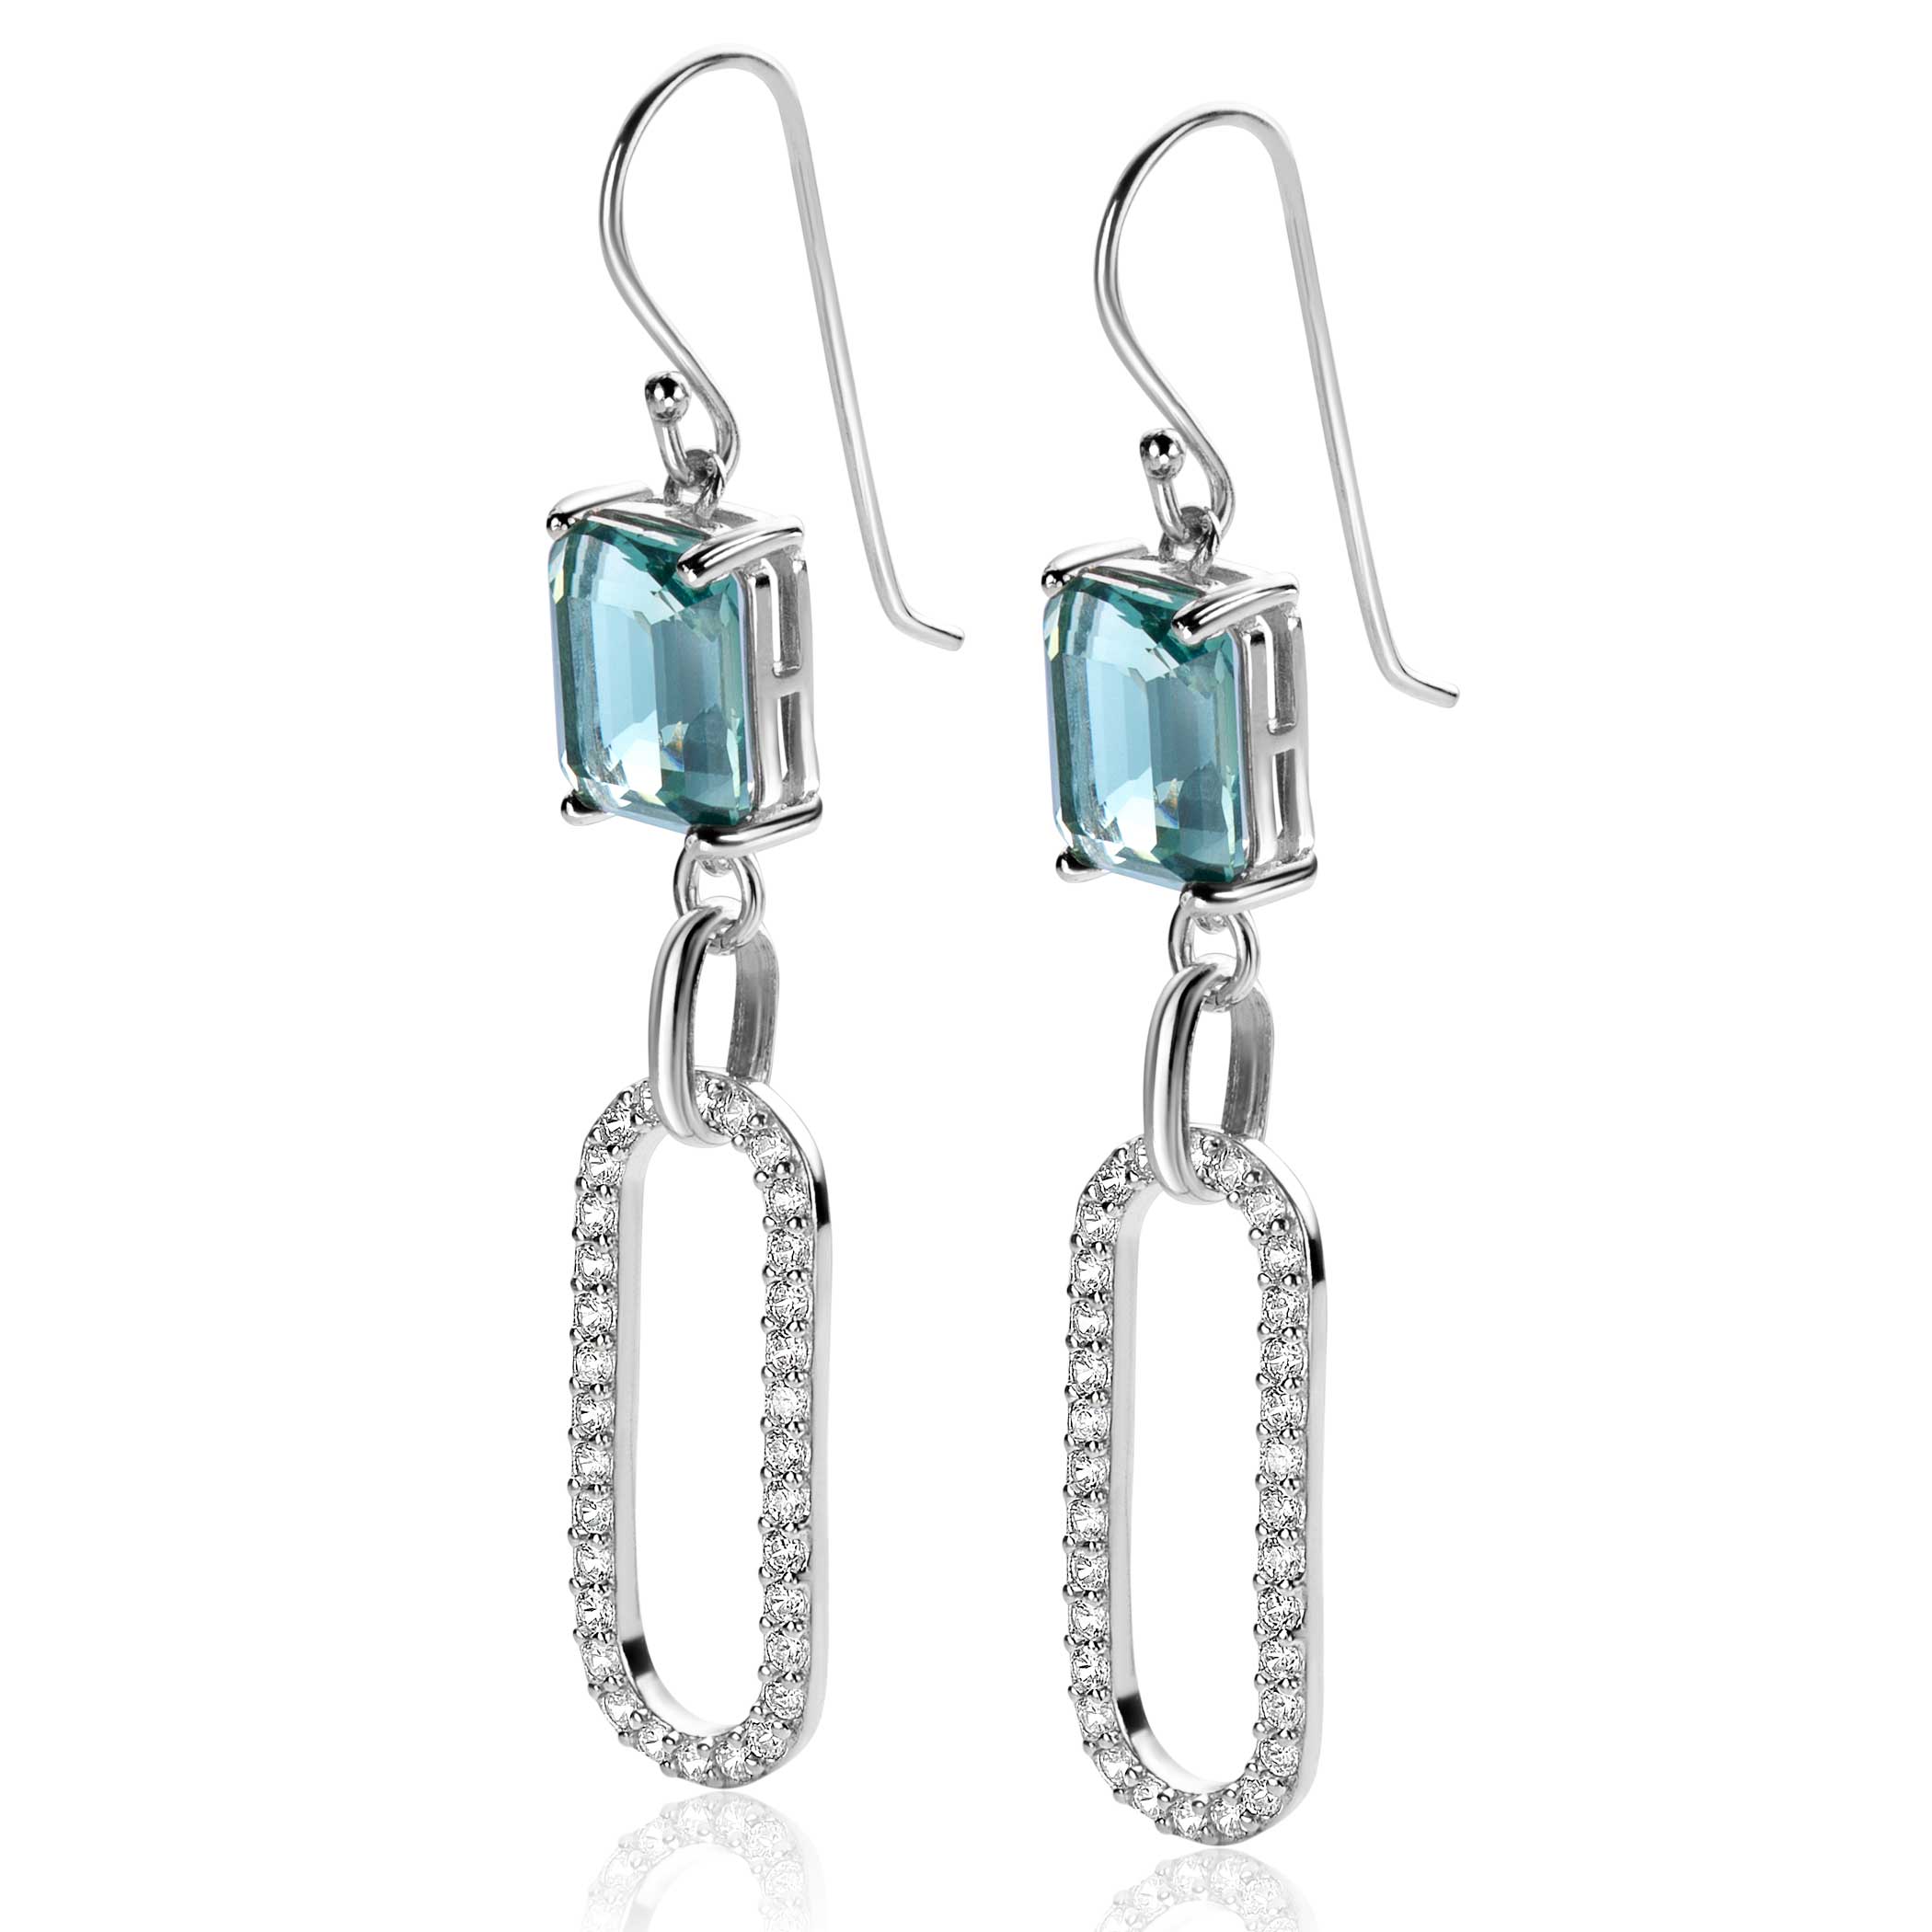 58mm ZINZI Sterling Silver Drop Earrings with Beautiful Oval link,White Zirconias and Greenish-Blue (Petrol) Color Stone in Prong Setting ZIO2487L